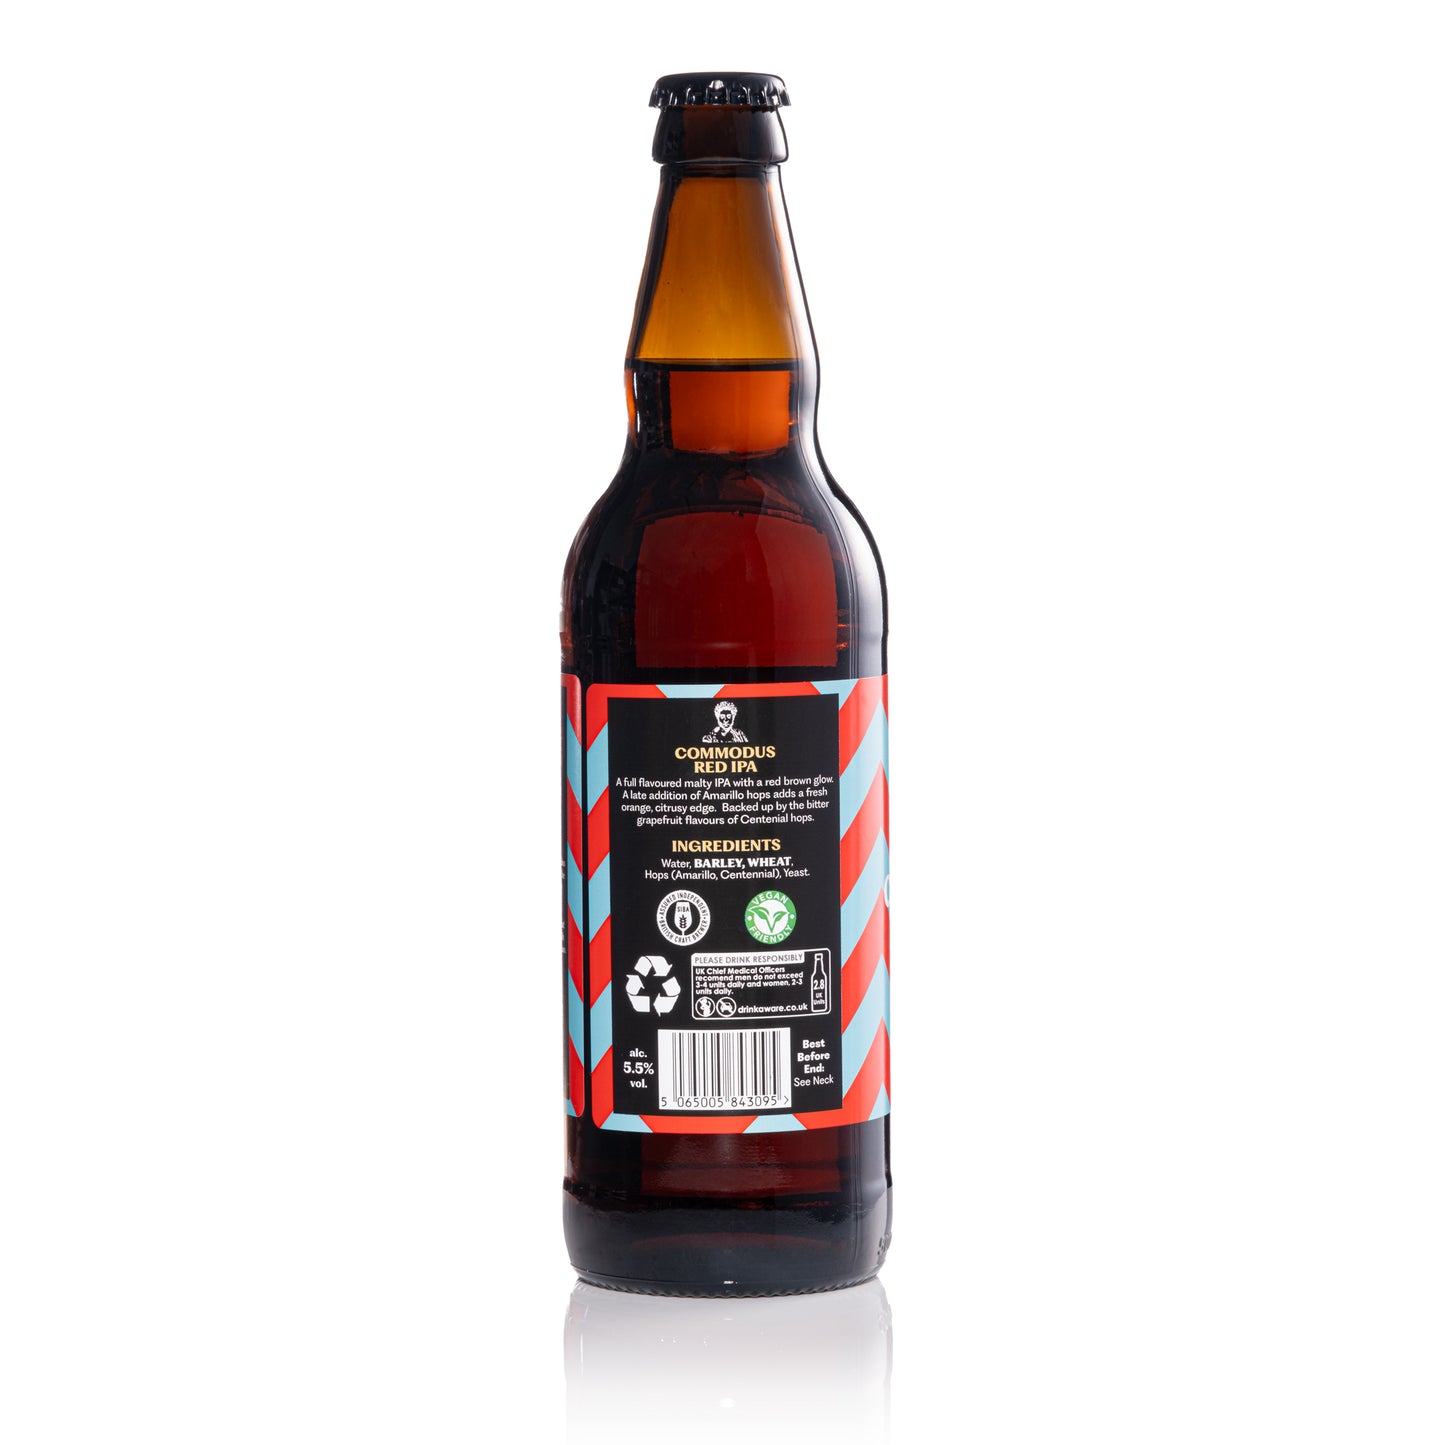 Commodus, Red IPA, 5.5% - 12x 500ml Bottle